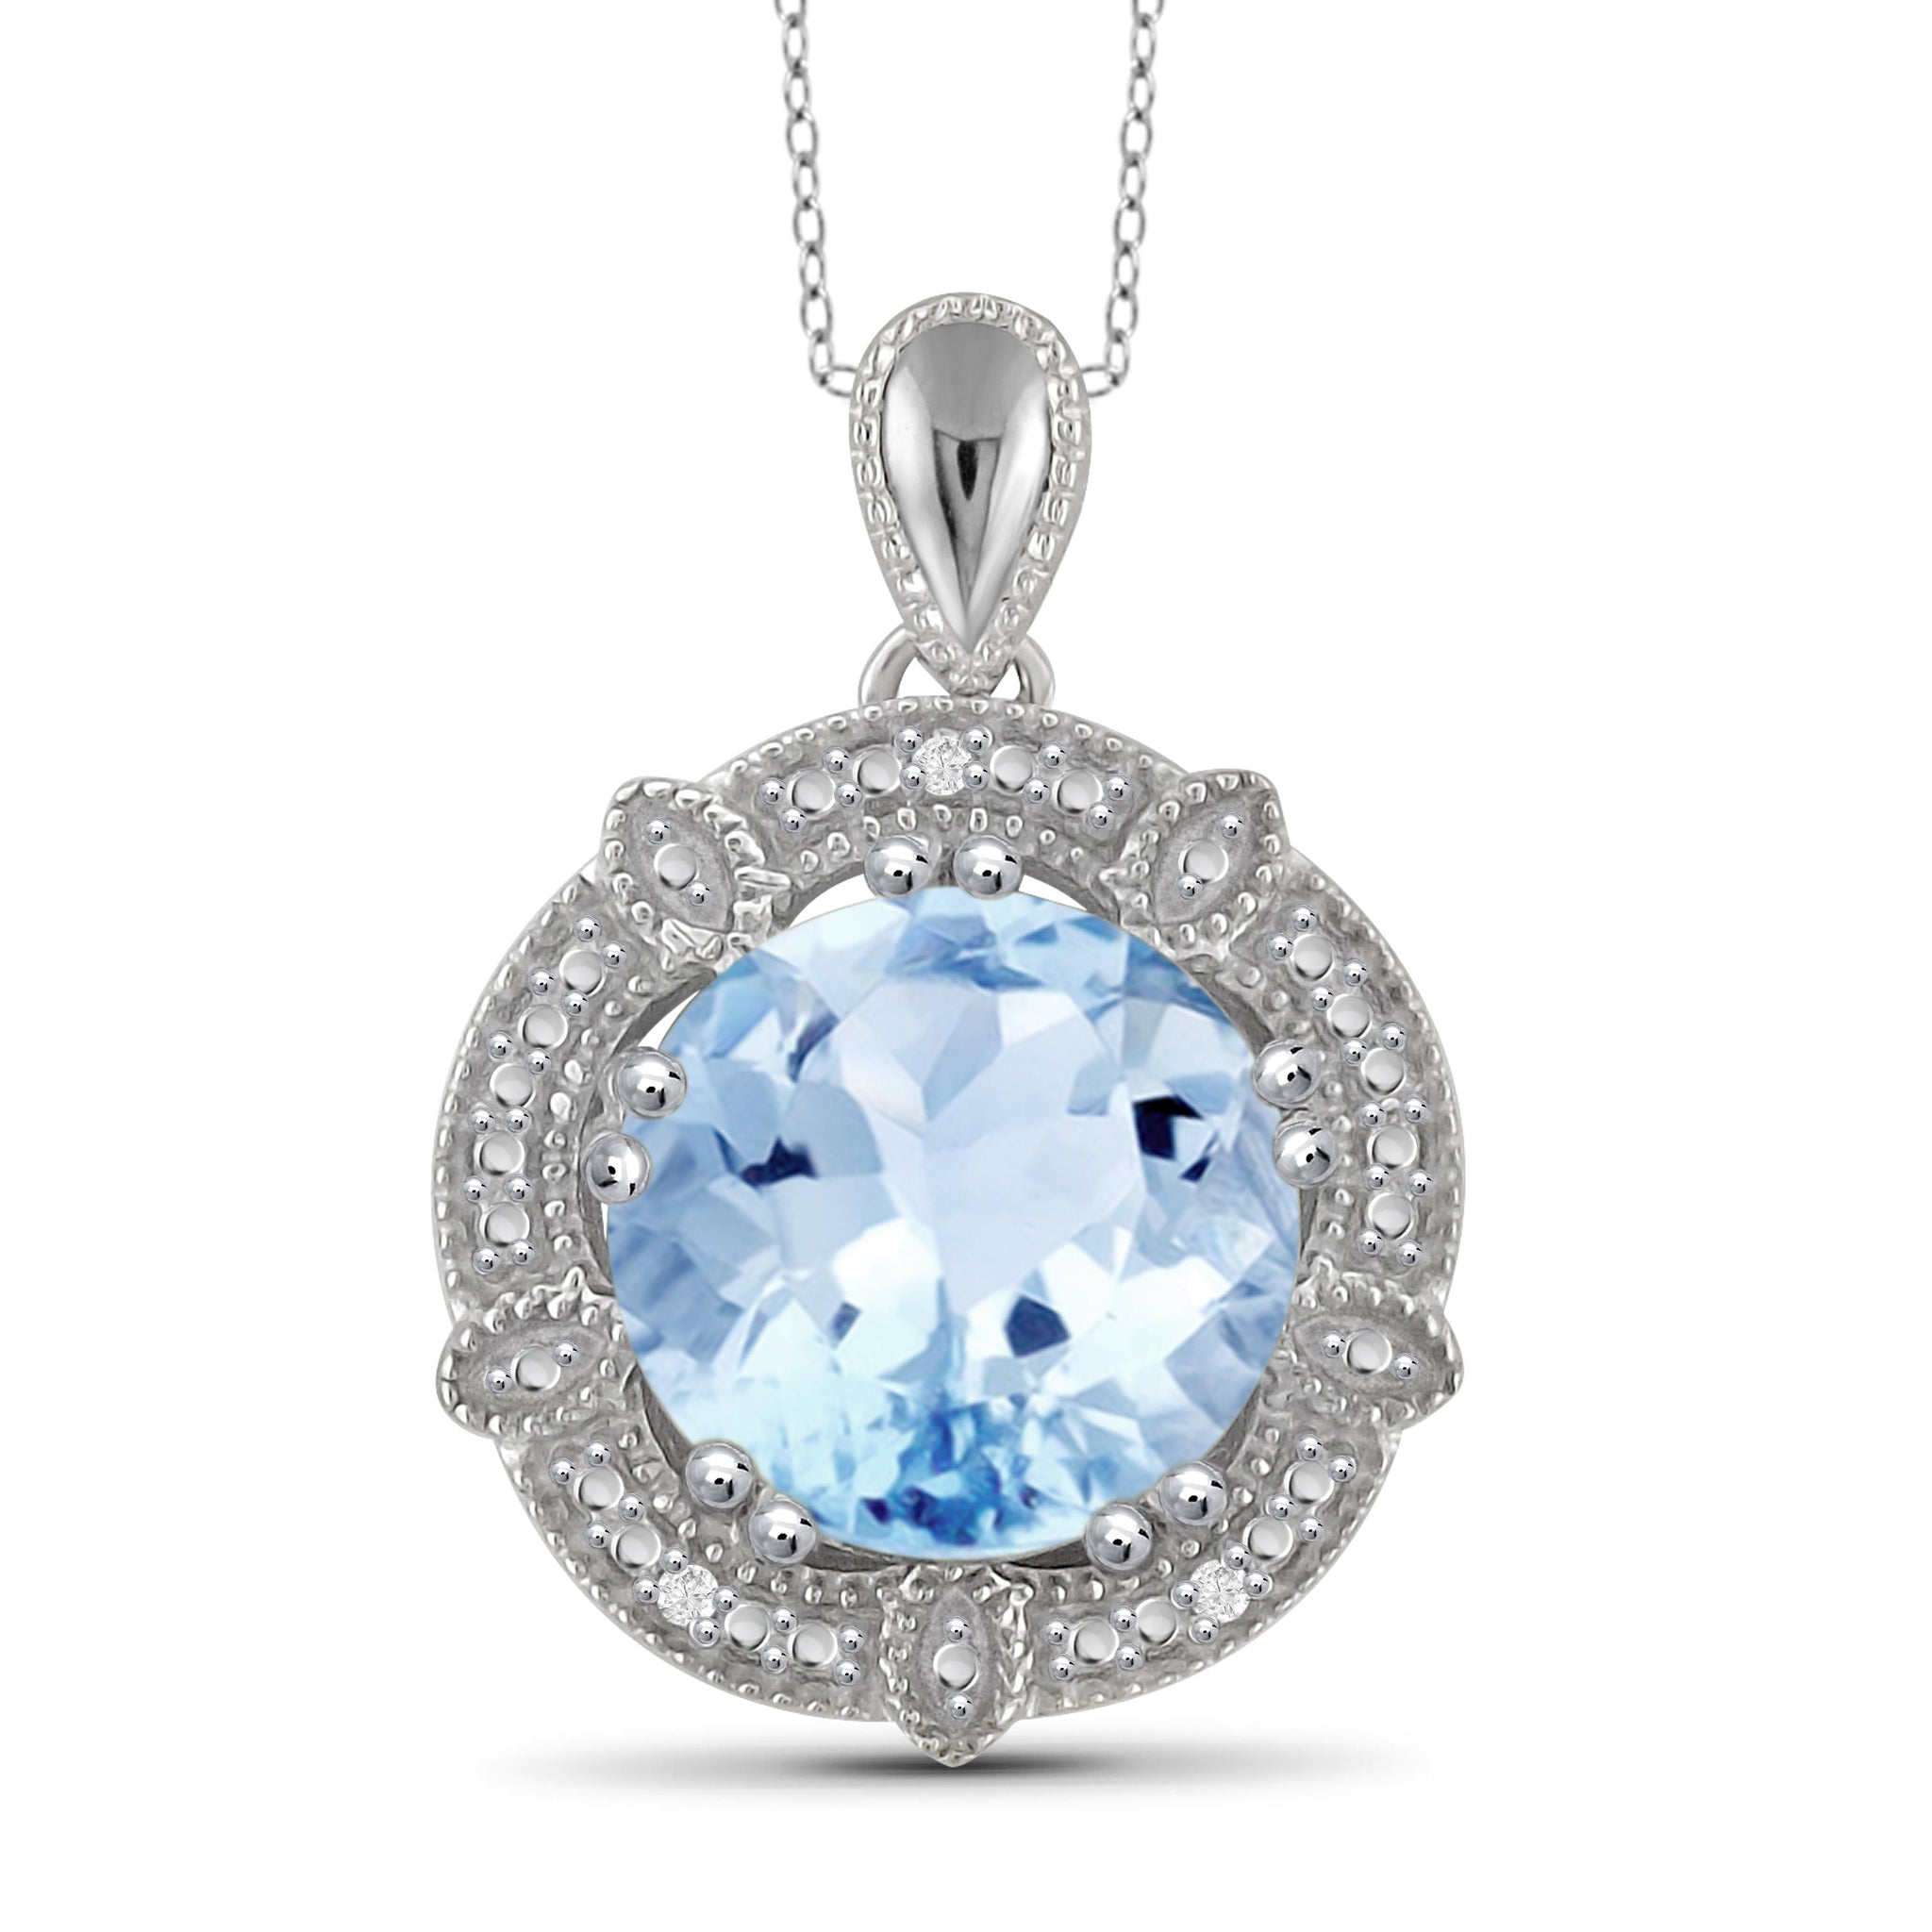 JewelonFire 4 1/4 Carat T.G.W. Sky Blue Topaz And White Diamond Accent Sterling Silver Pendant - Assorted Colors